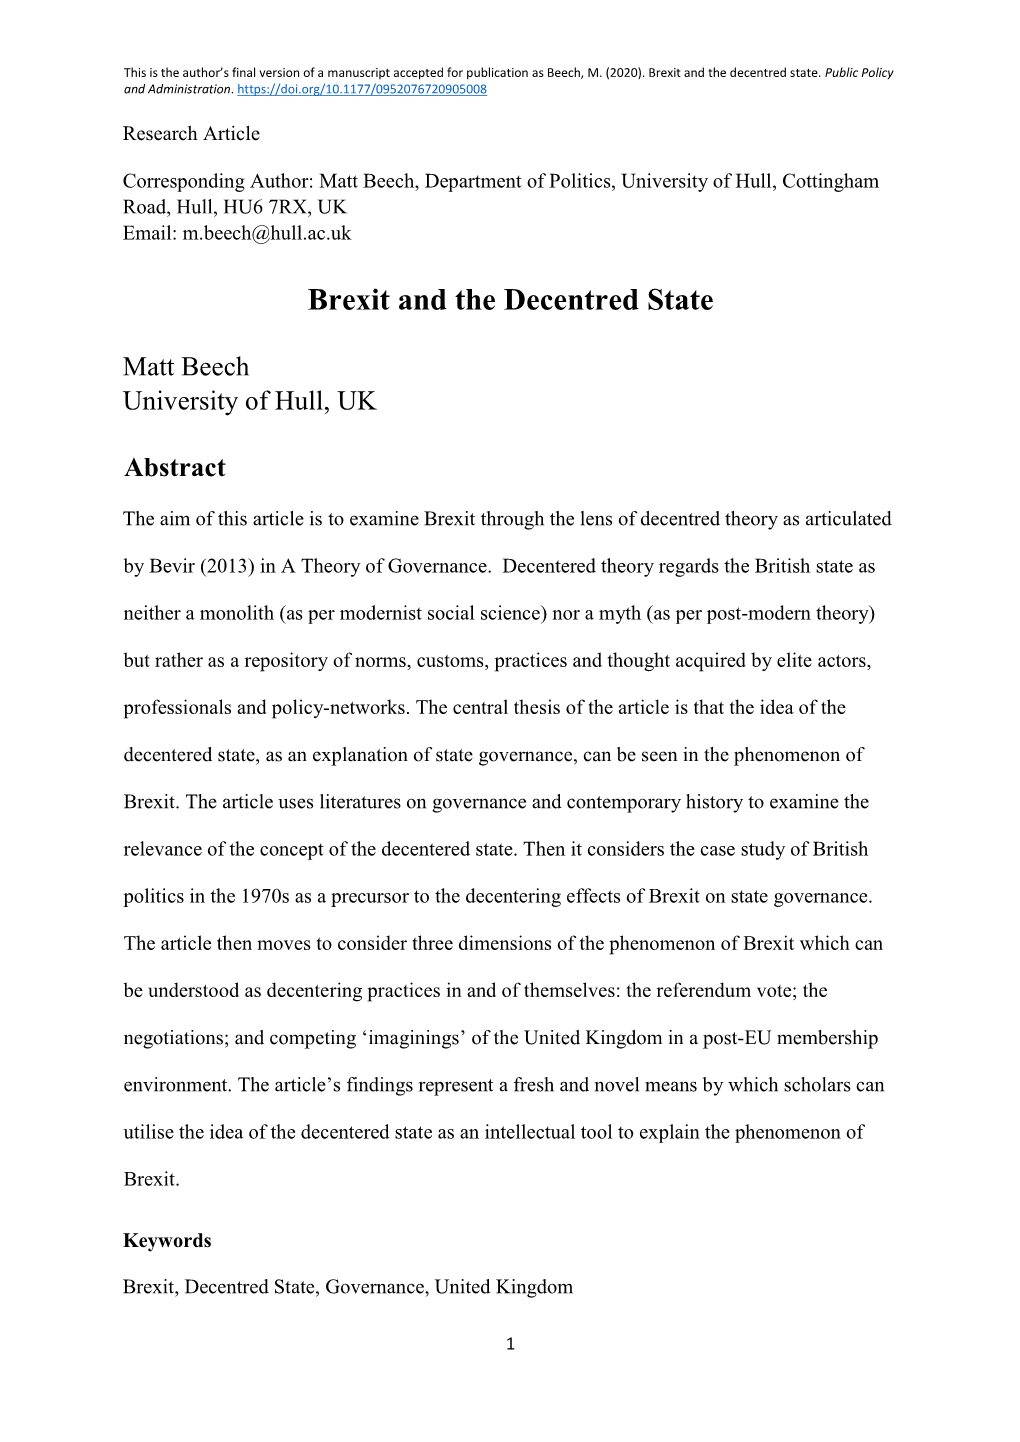 Brexit and the Decentred State